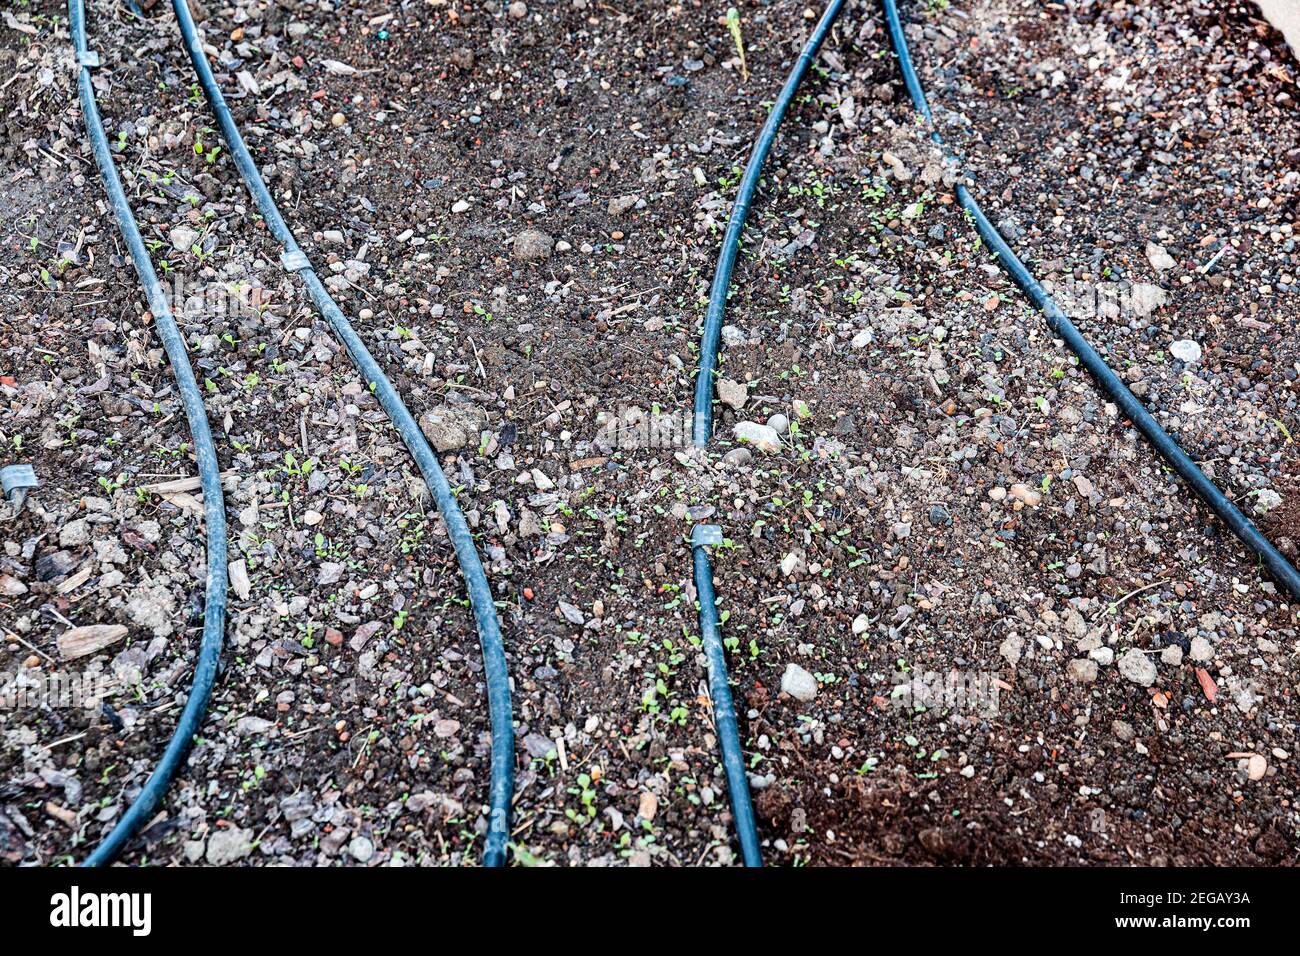 black dirty irrigation hoses lie on the ground with many small stones Stock Photo